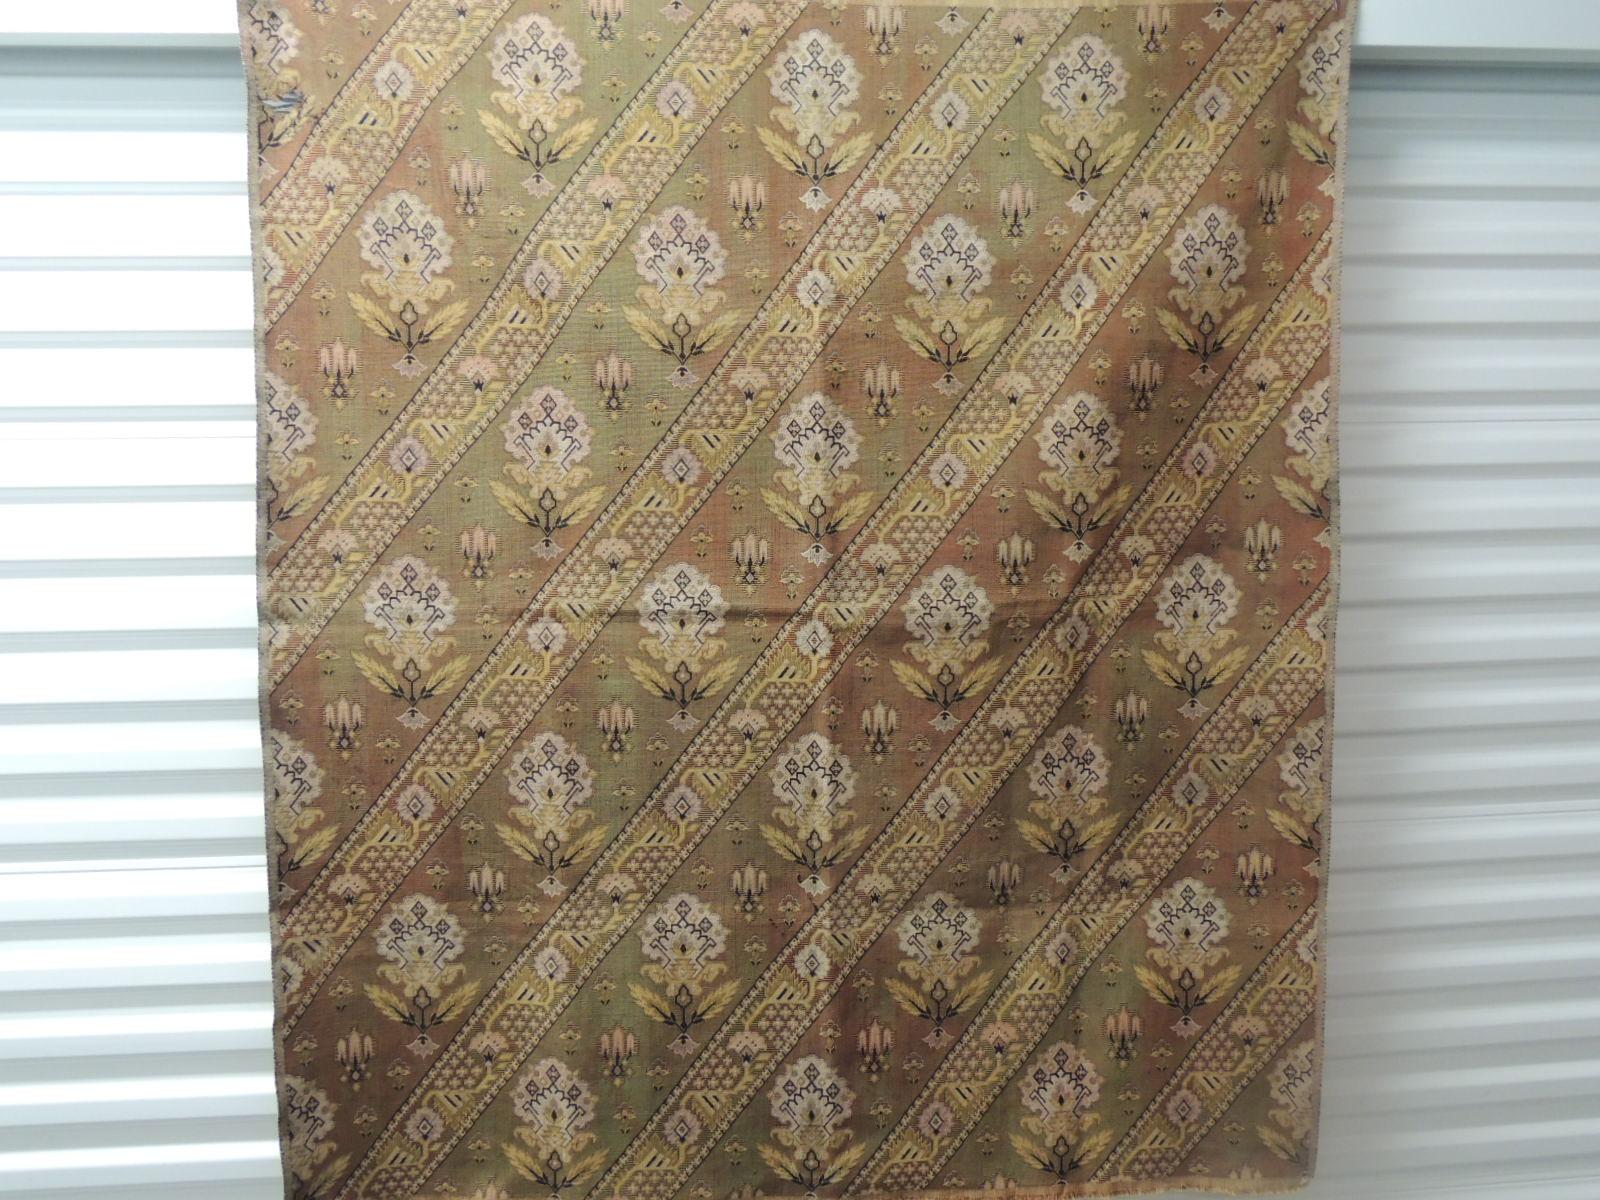 Antique Textile Collection:
Vintage Turkish Woven Floral Tapestry Panel. Depicting flowers and vines in shades of yellow, soft orange and green.
Could use for upholstery or as a wall hanging.
Sold as is.
Size: 49 W x 56 L